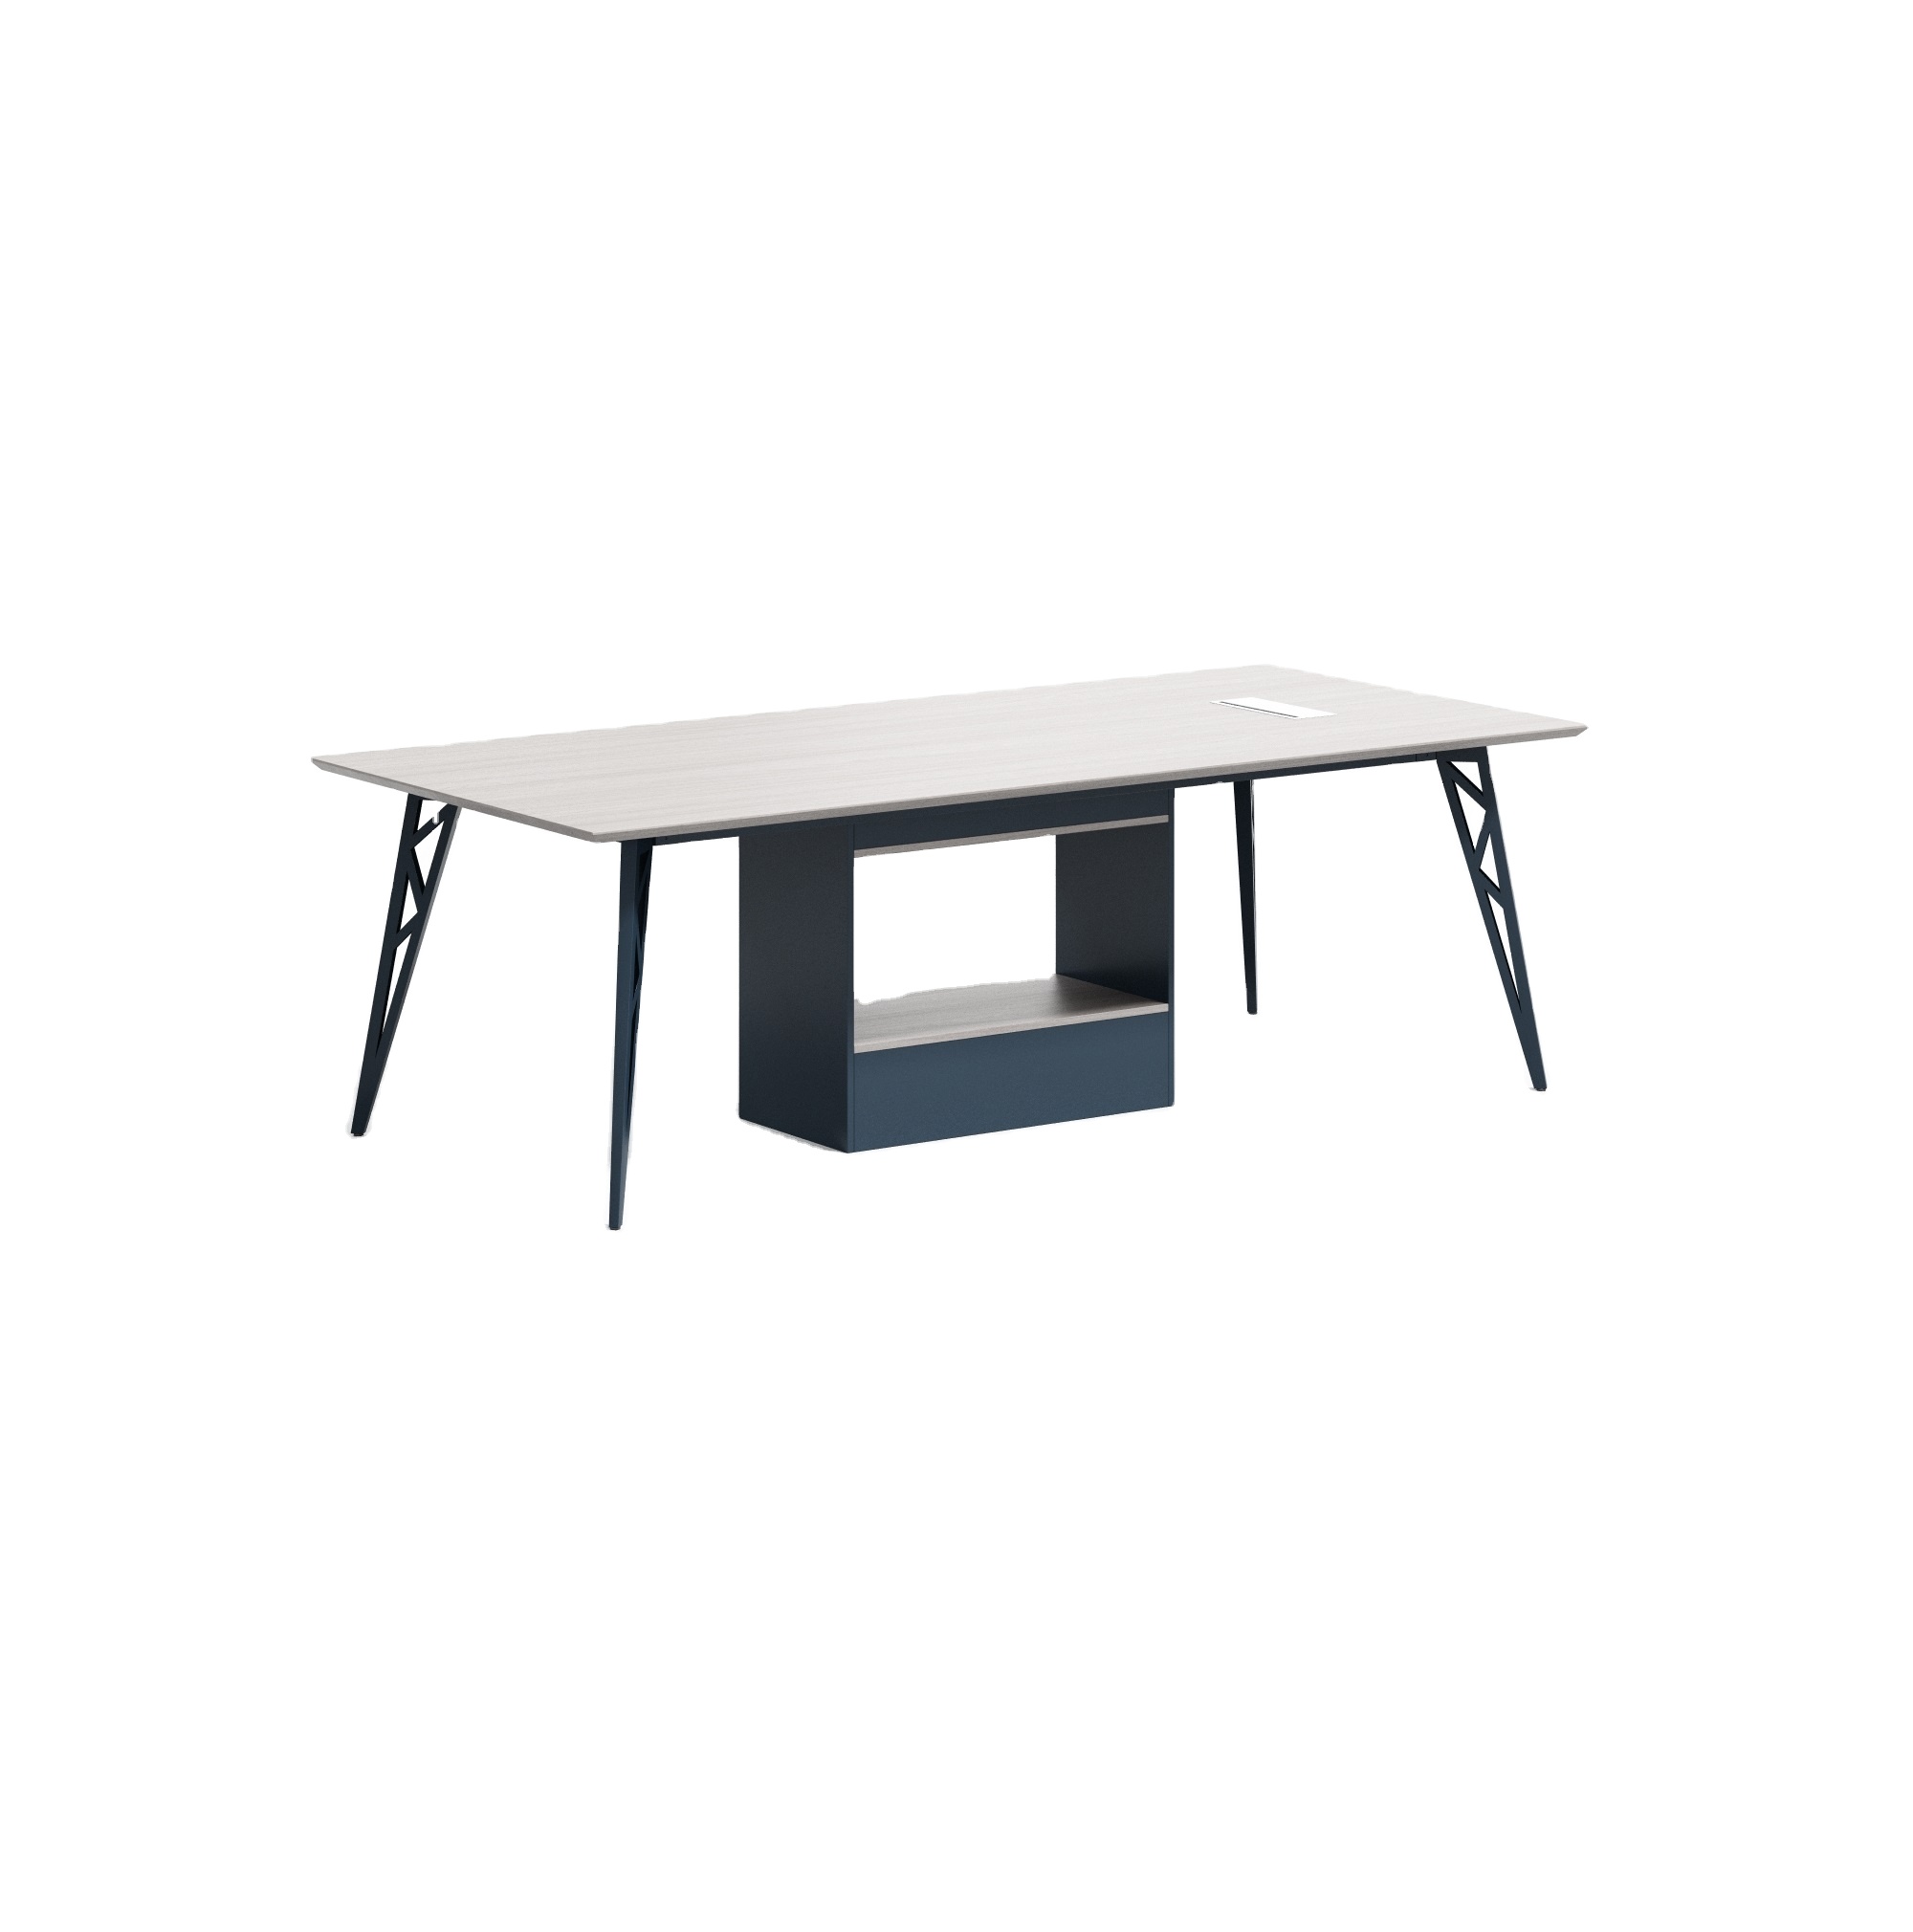 Dious Office desk conference table meeting table